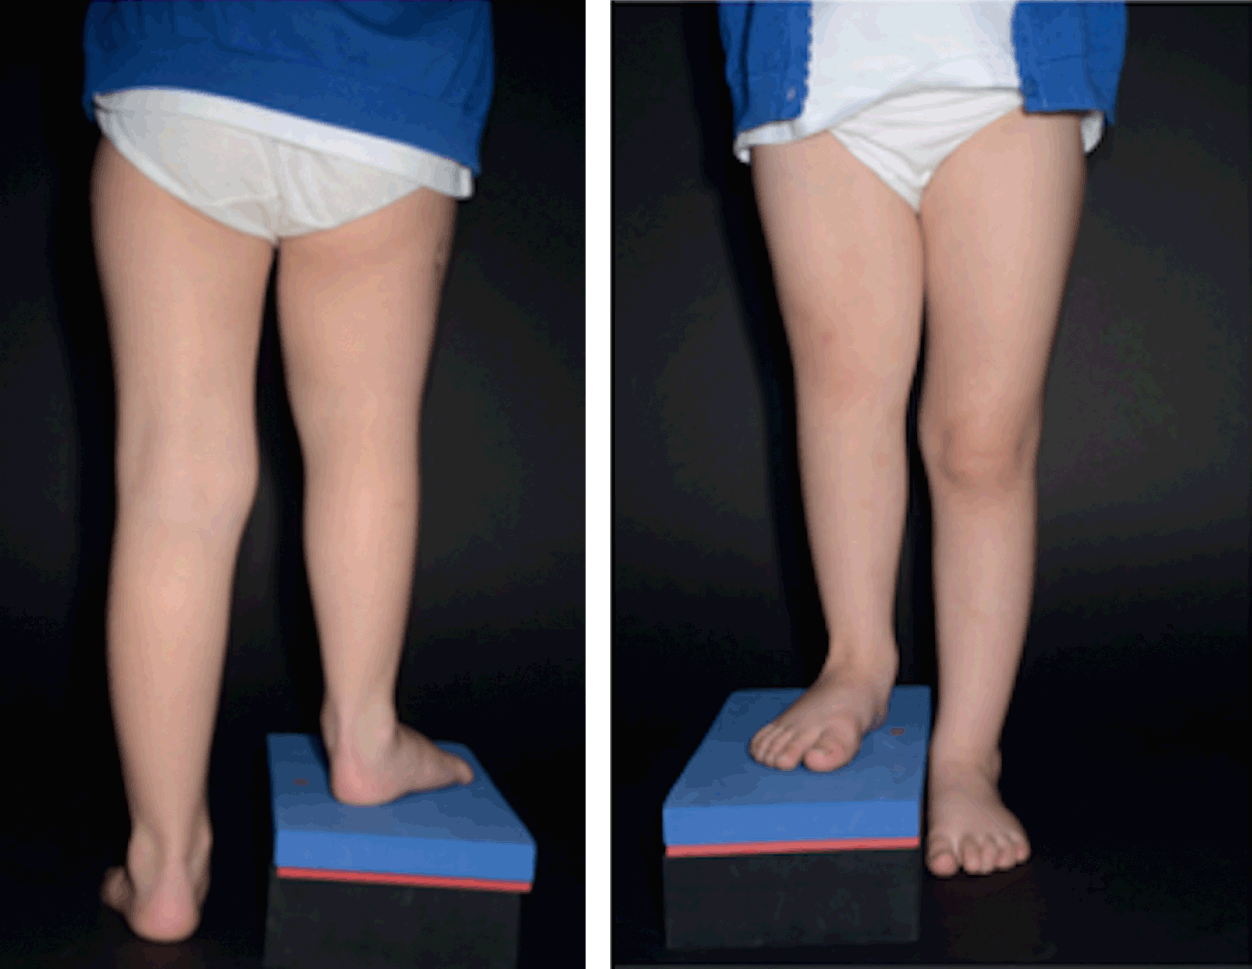 A CASE OF UNILATERAL TIBIAL HEMIMELIA WITH UNILATERAL RADIAL CLUB